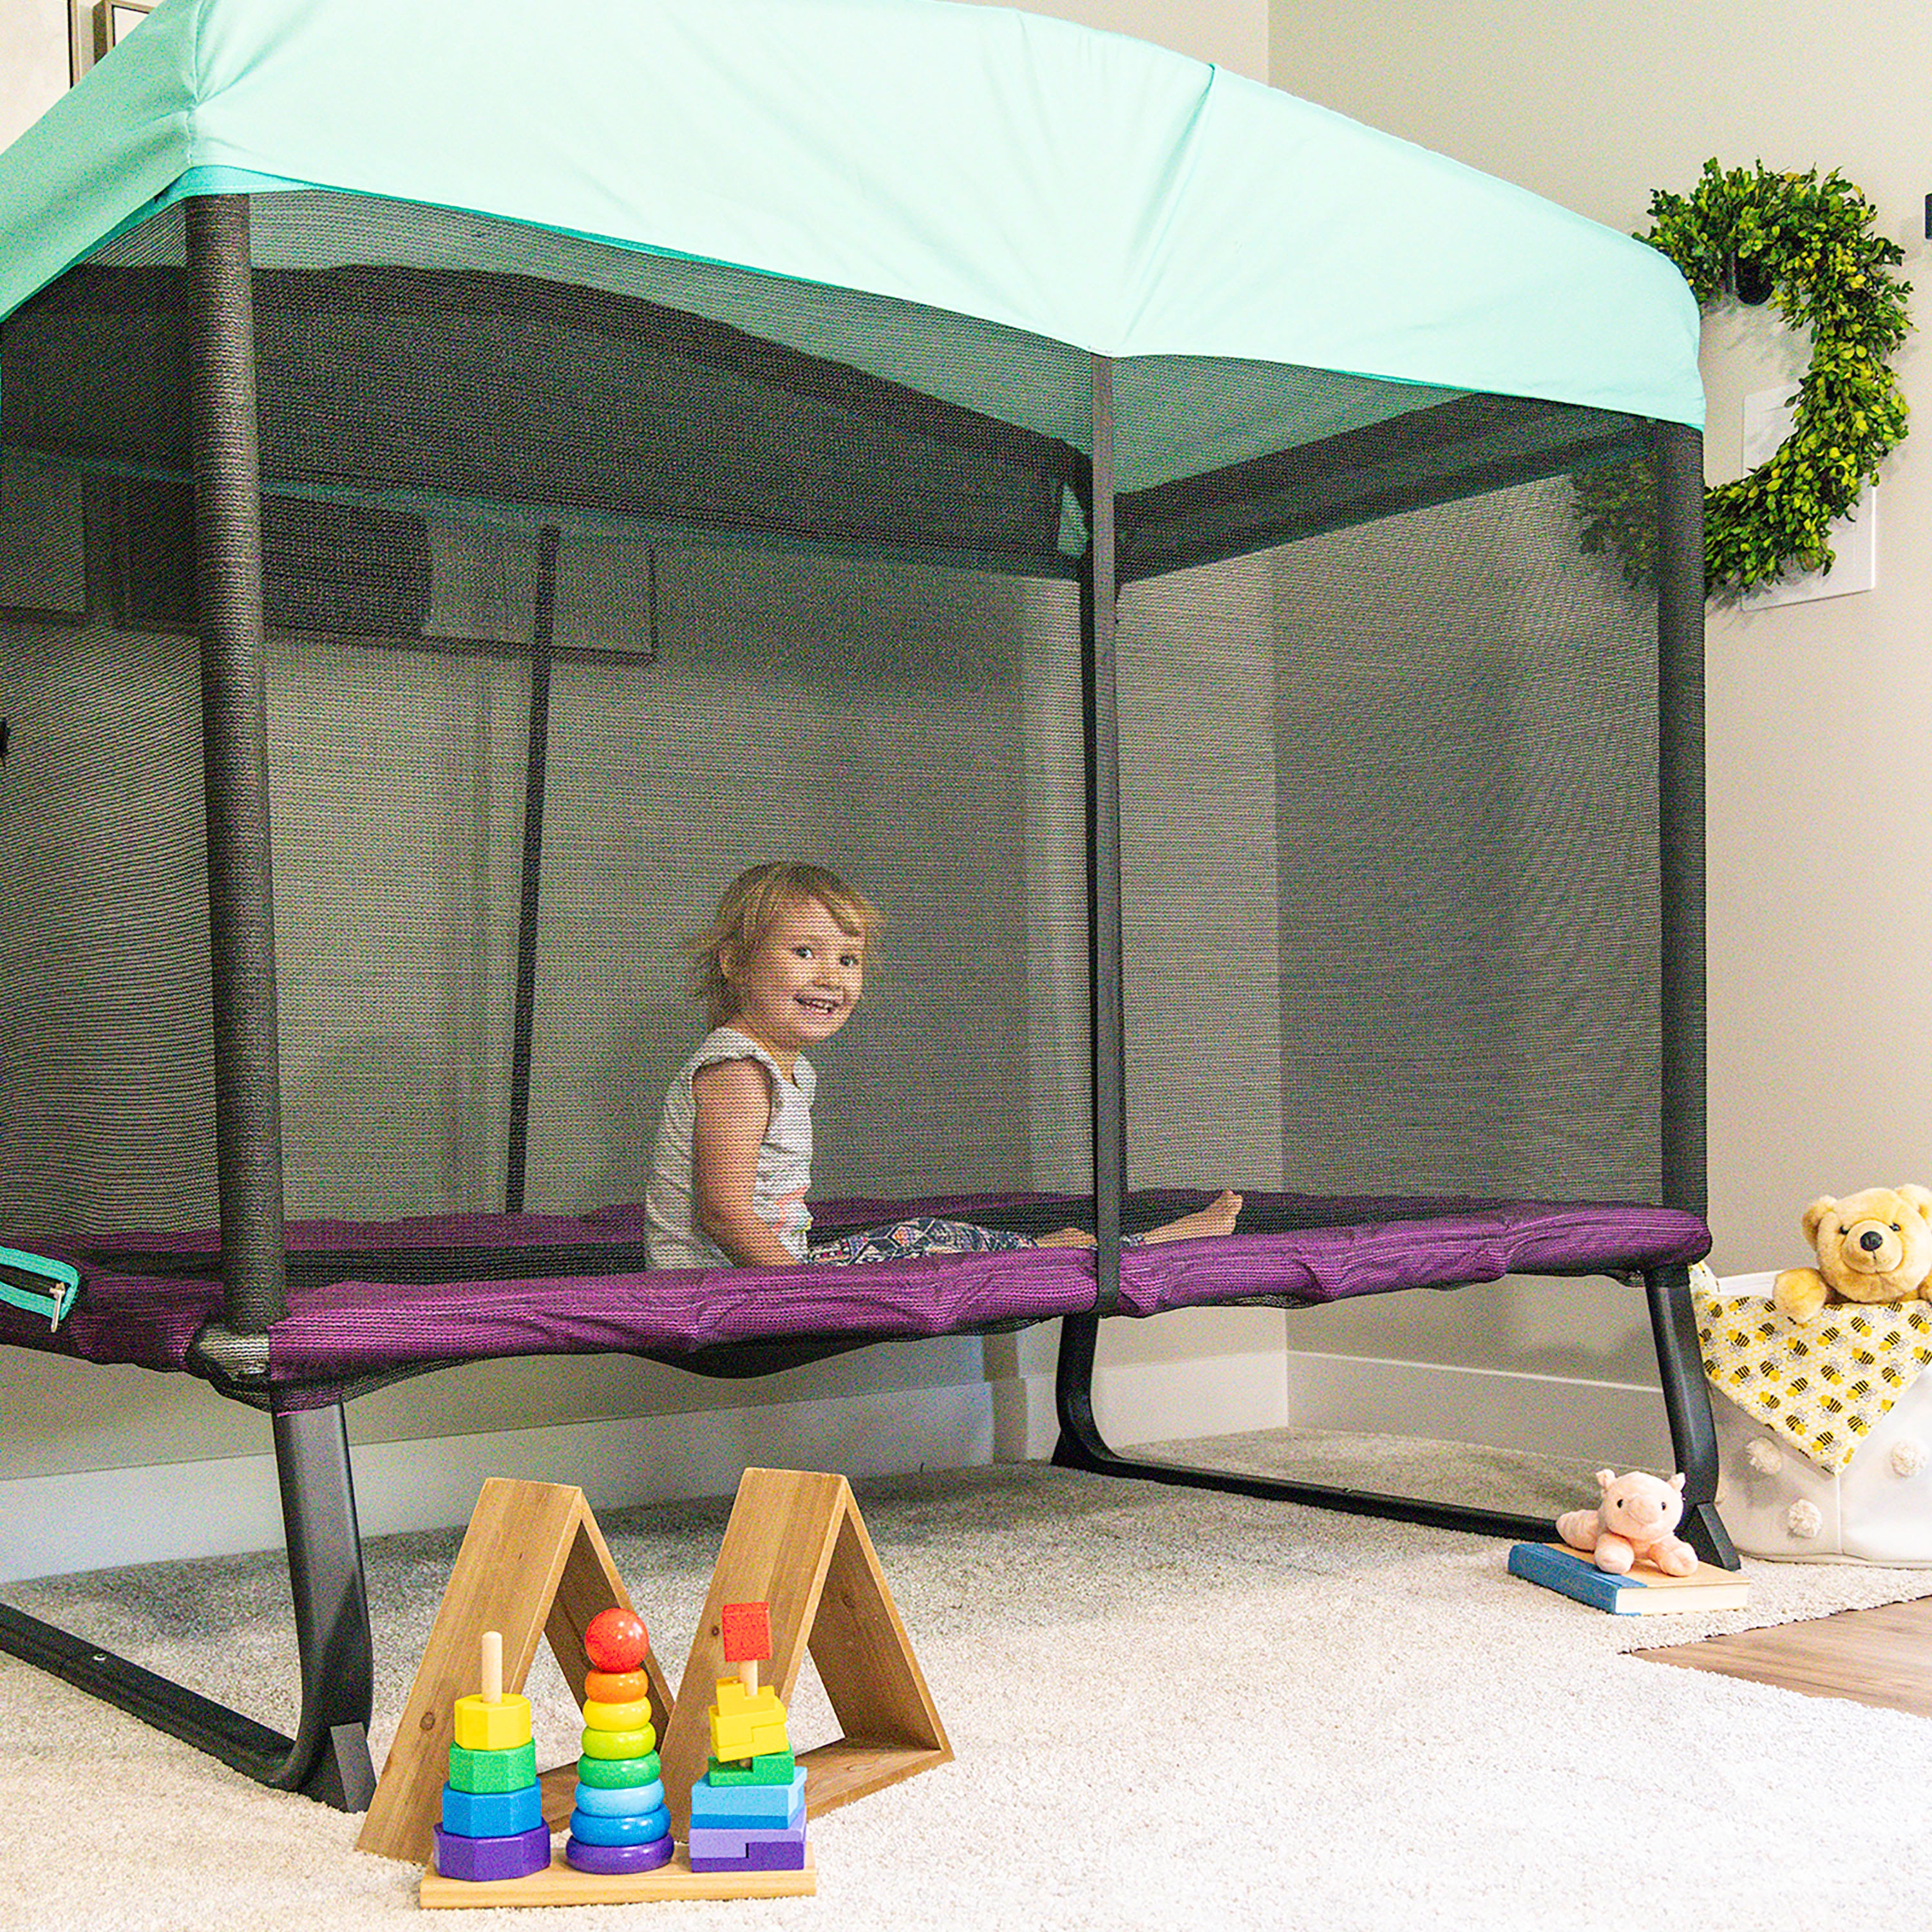 The rectangle Eeyore trampoline sits in the corner of a playroom. A young girl sits happily on the trampoline. 